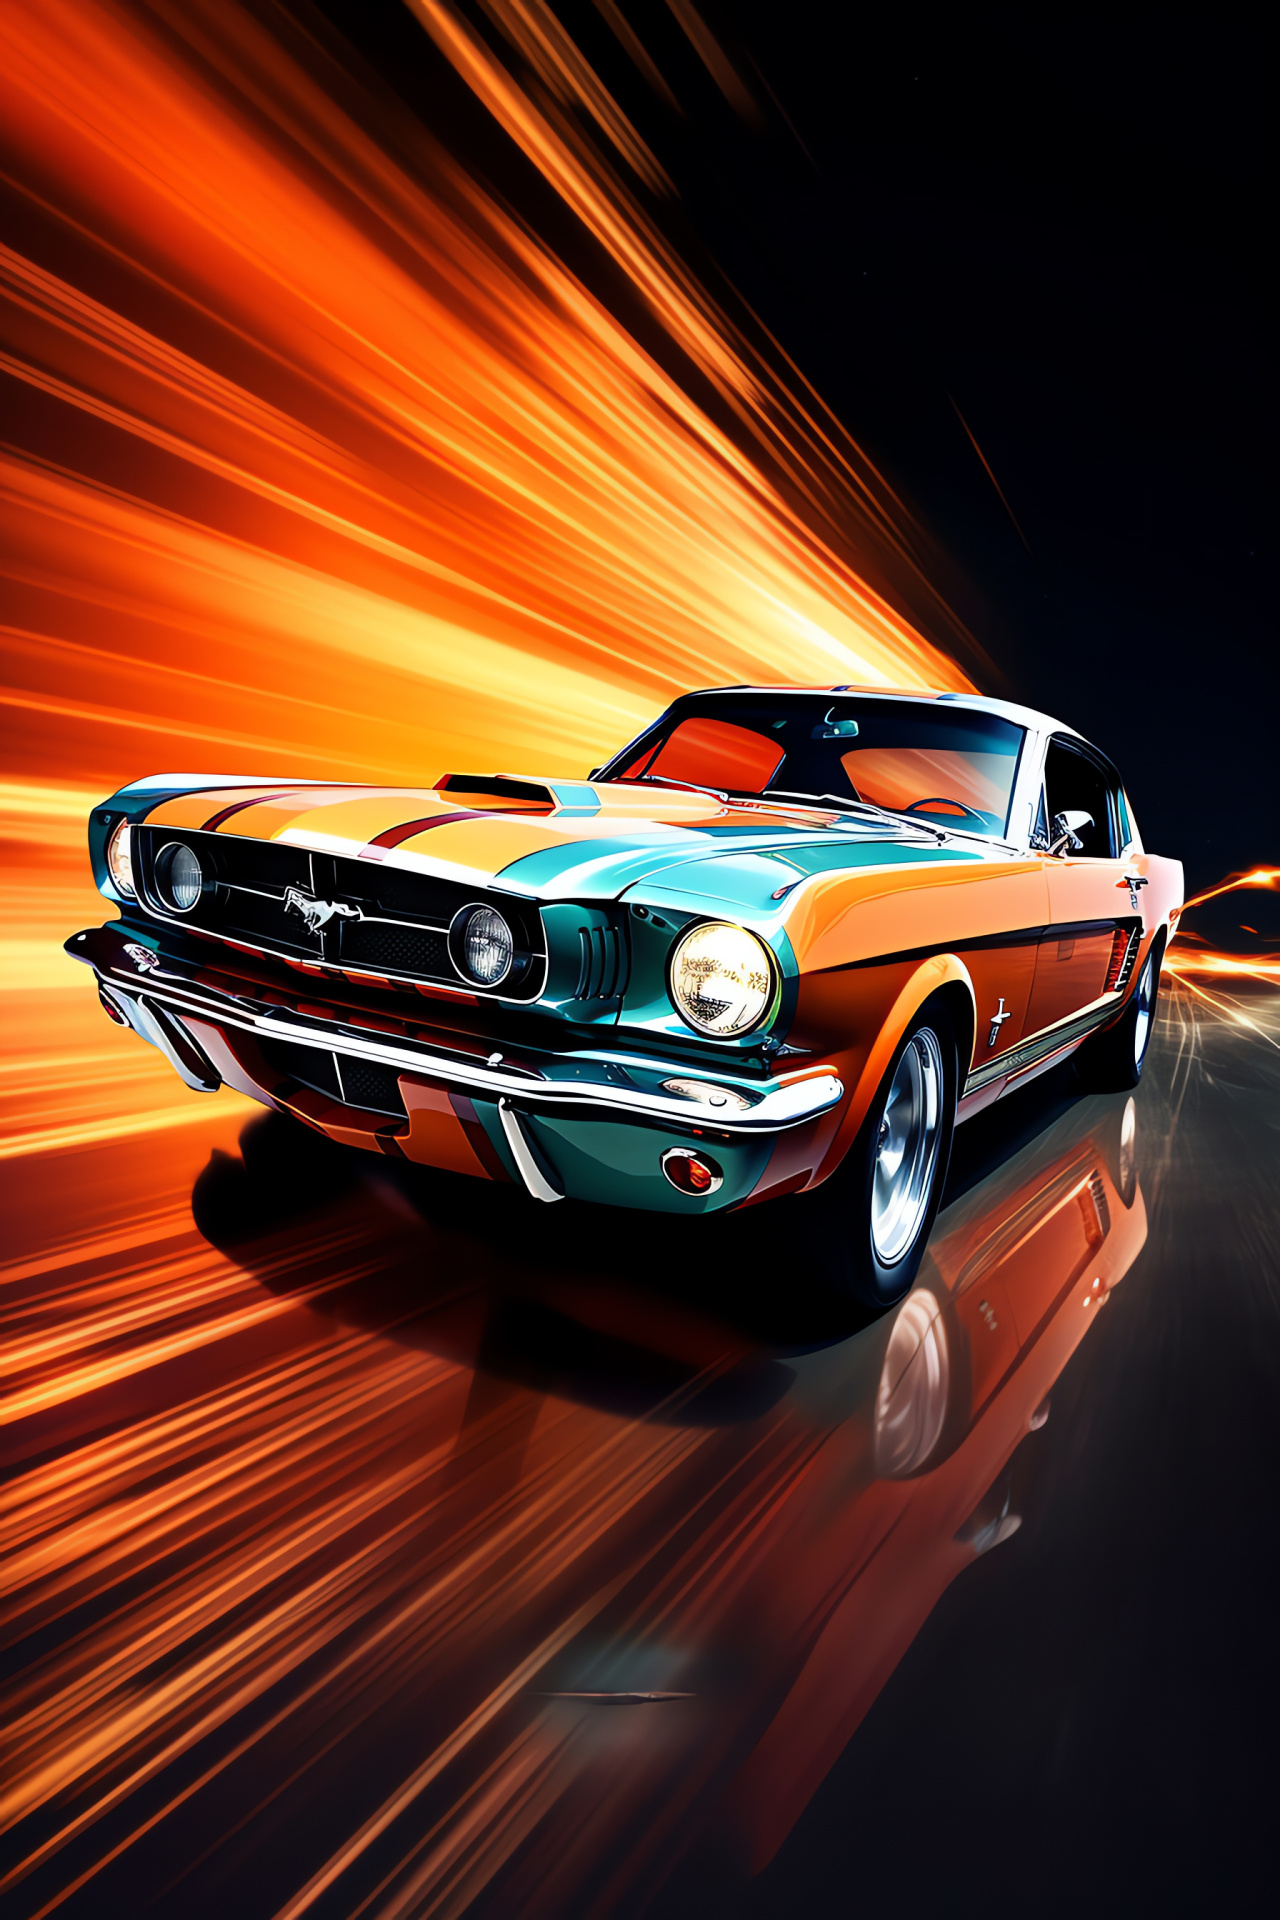 Ford Mustang brilliance, Glowing line illumination, Wide stance Mustang, Dynamic car play, Auto presence, HD Phone Wallpaper